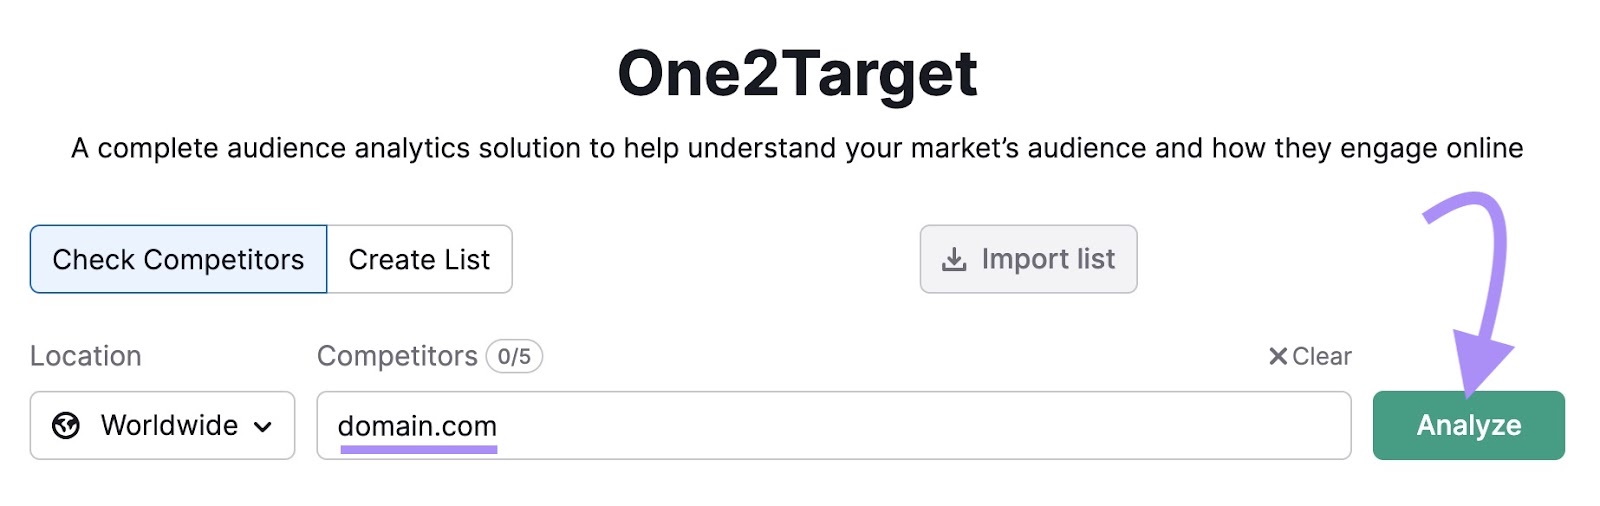 Search bar within the One2Target tool.